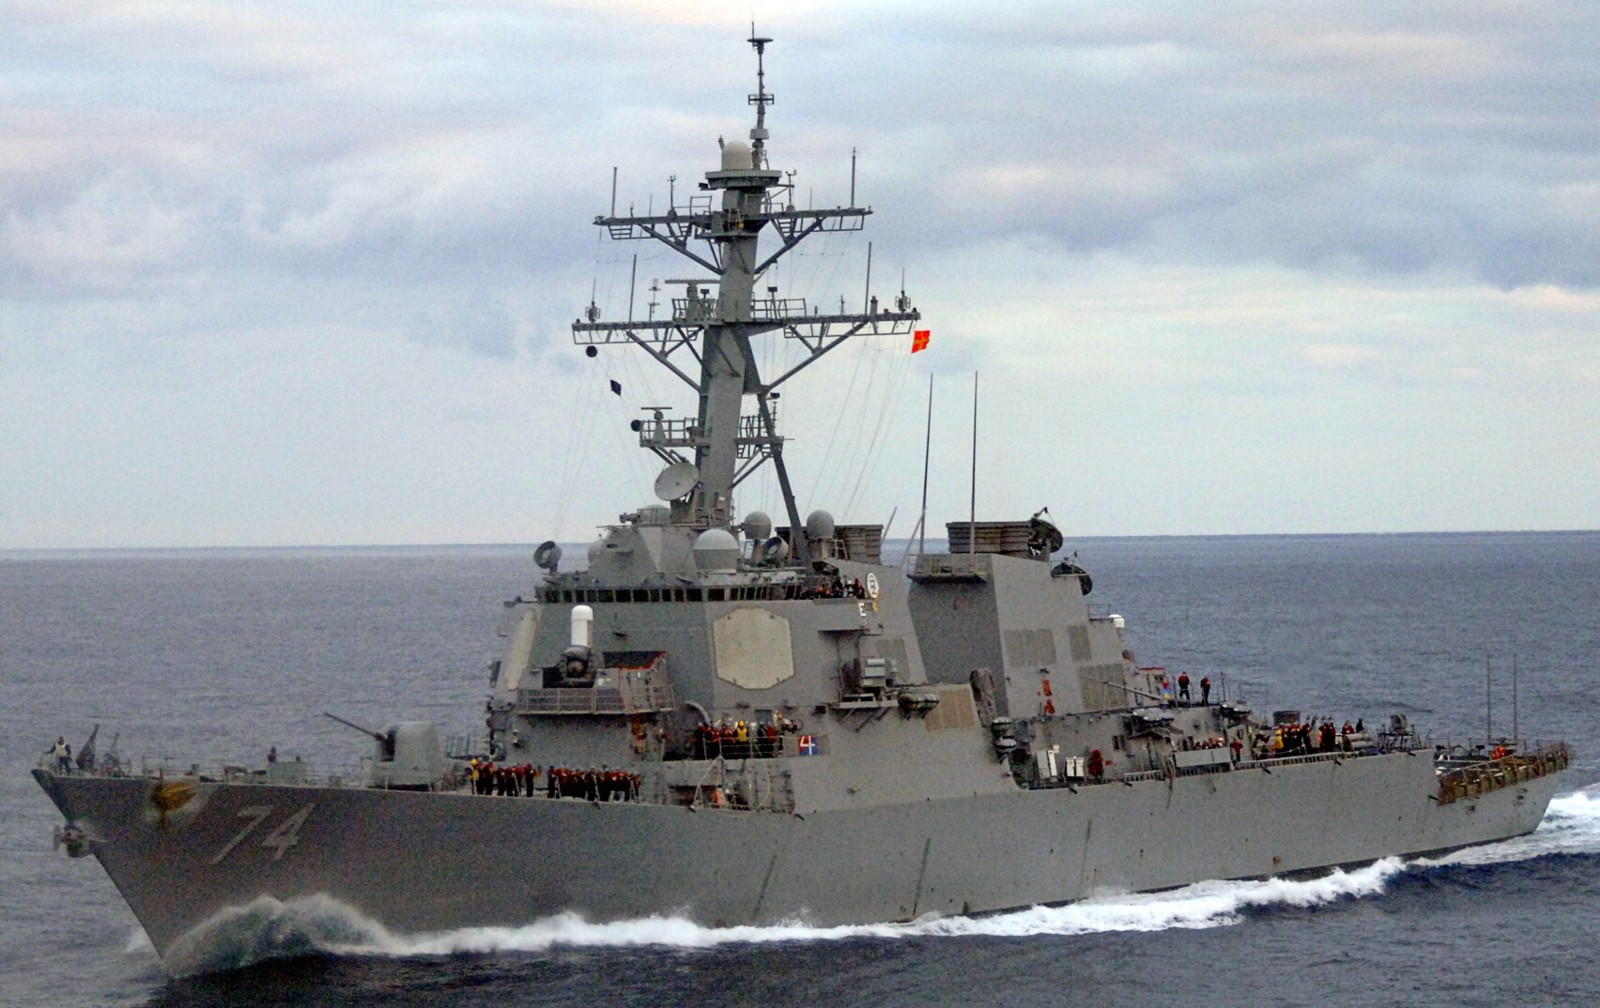 ddg-74 uss mcfaul guided missile destroyer arleigh burke class aegis bmd 46